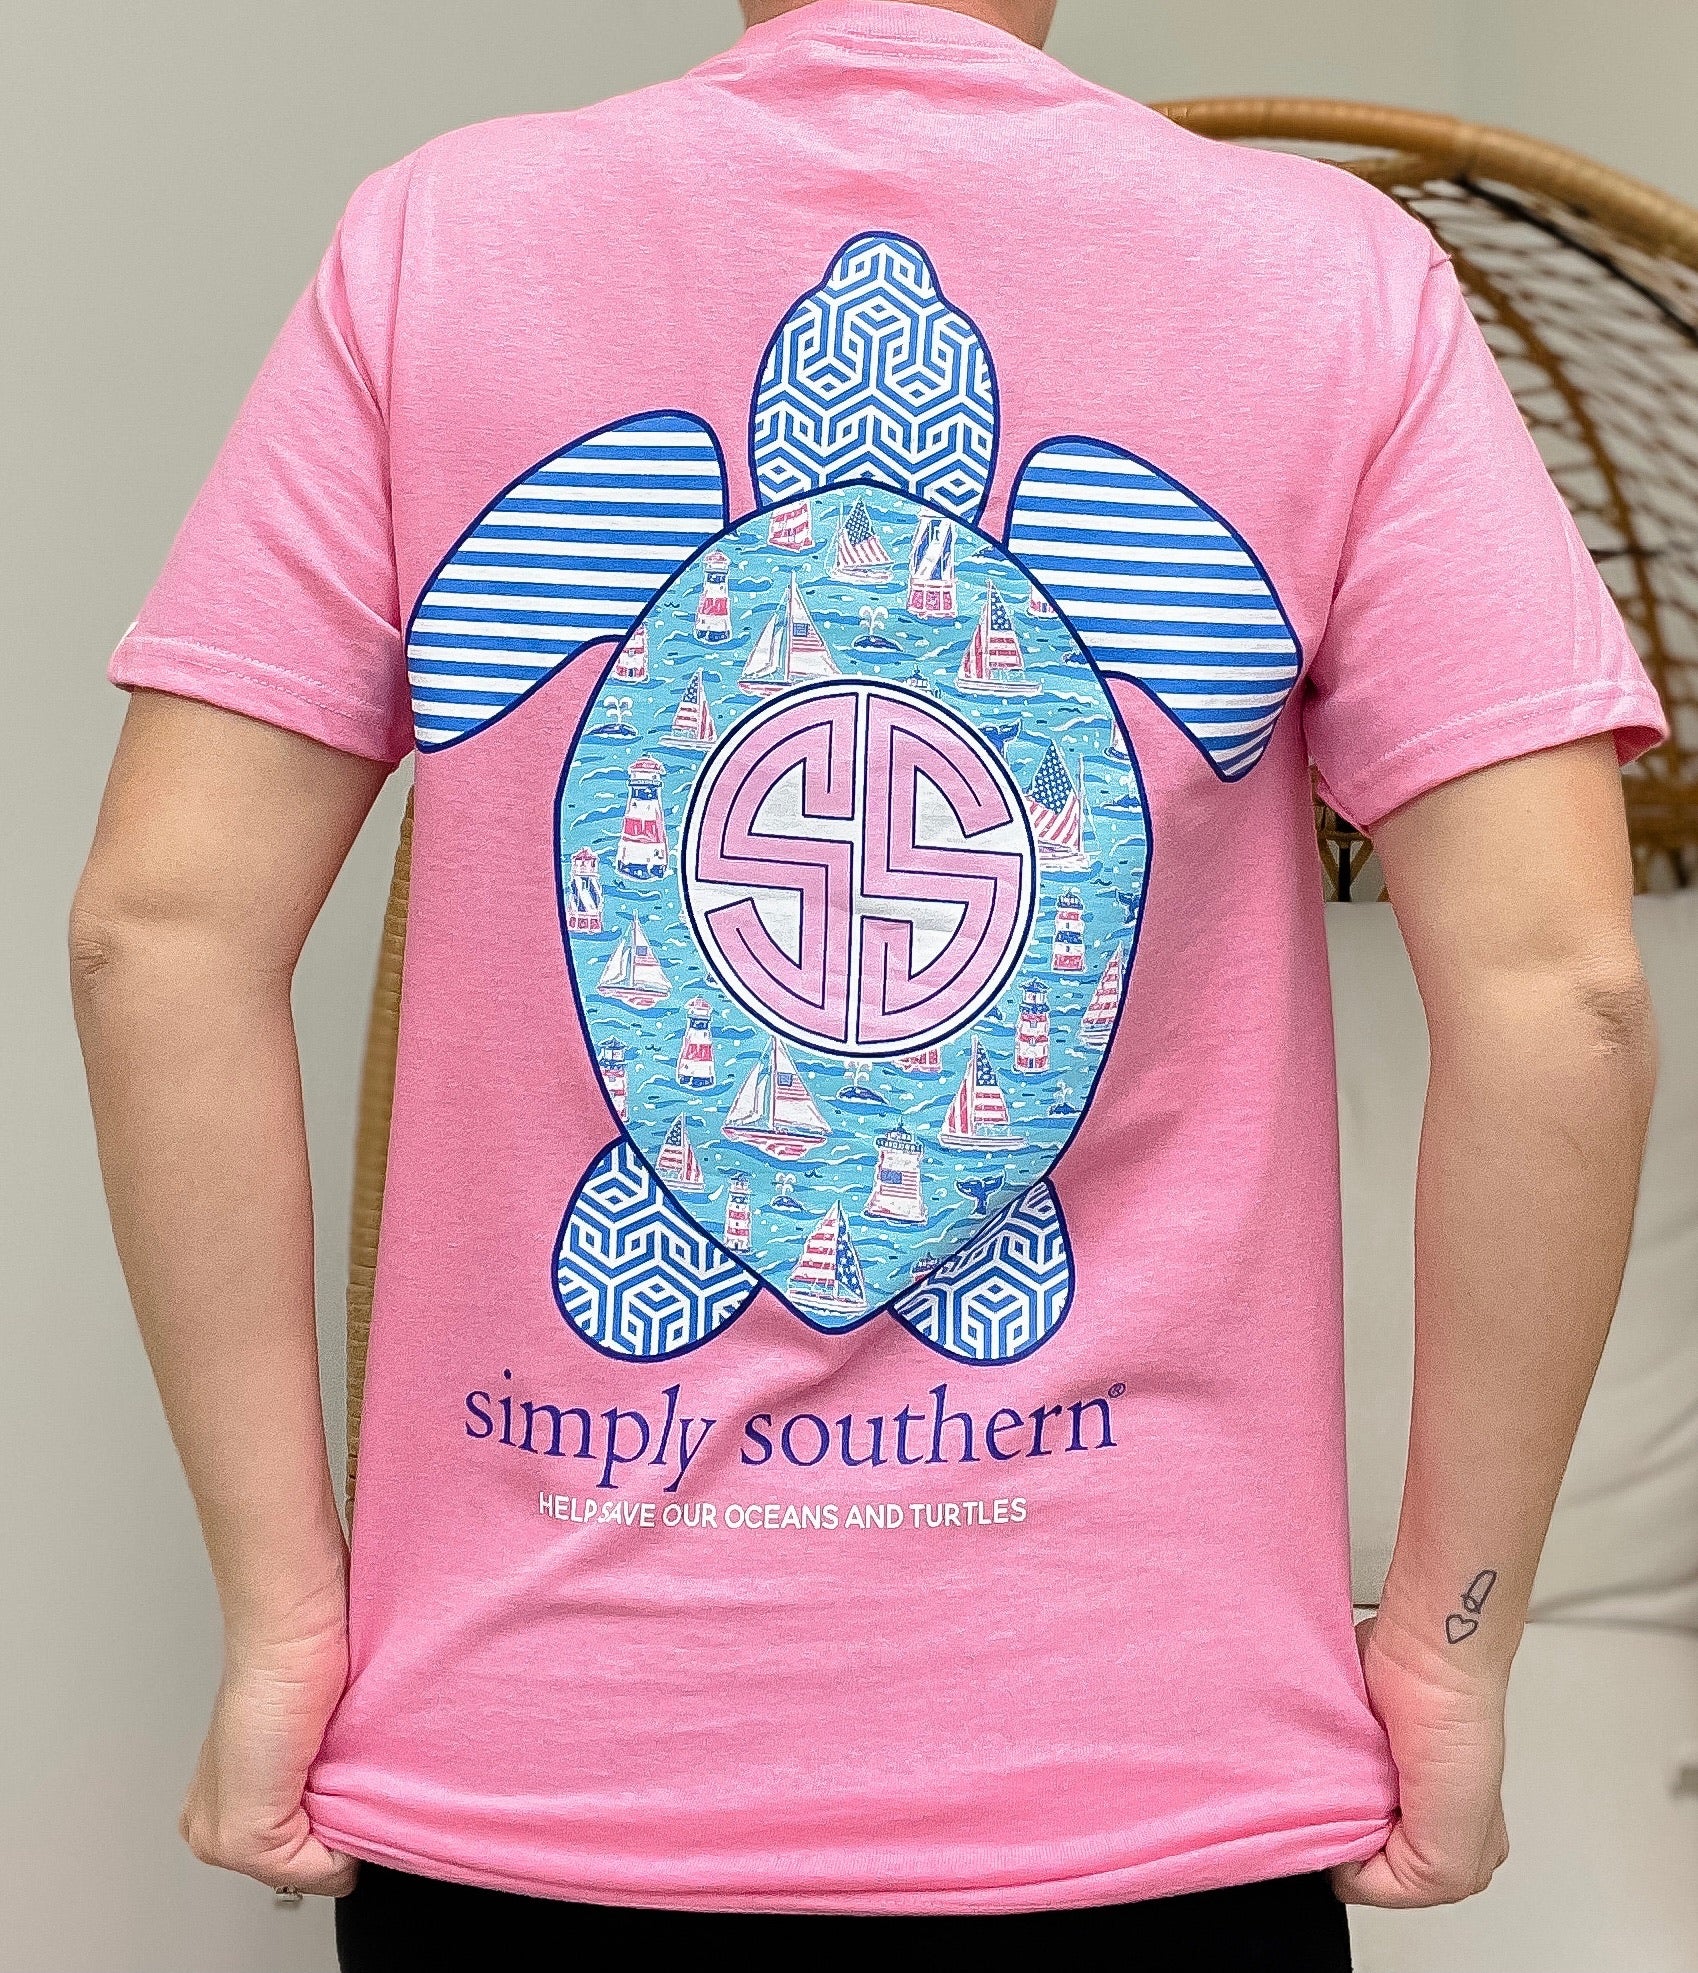 'Help Save Our Oceans and Turtles' Sailboat Turtle Short Sleeve by Simply Southern